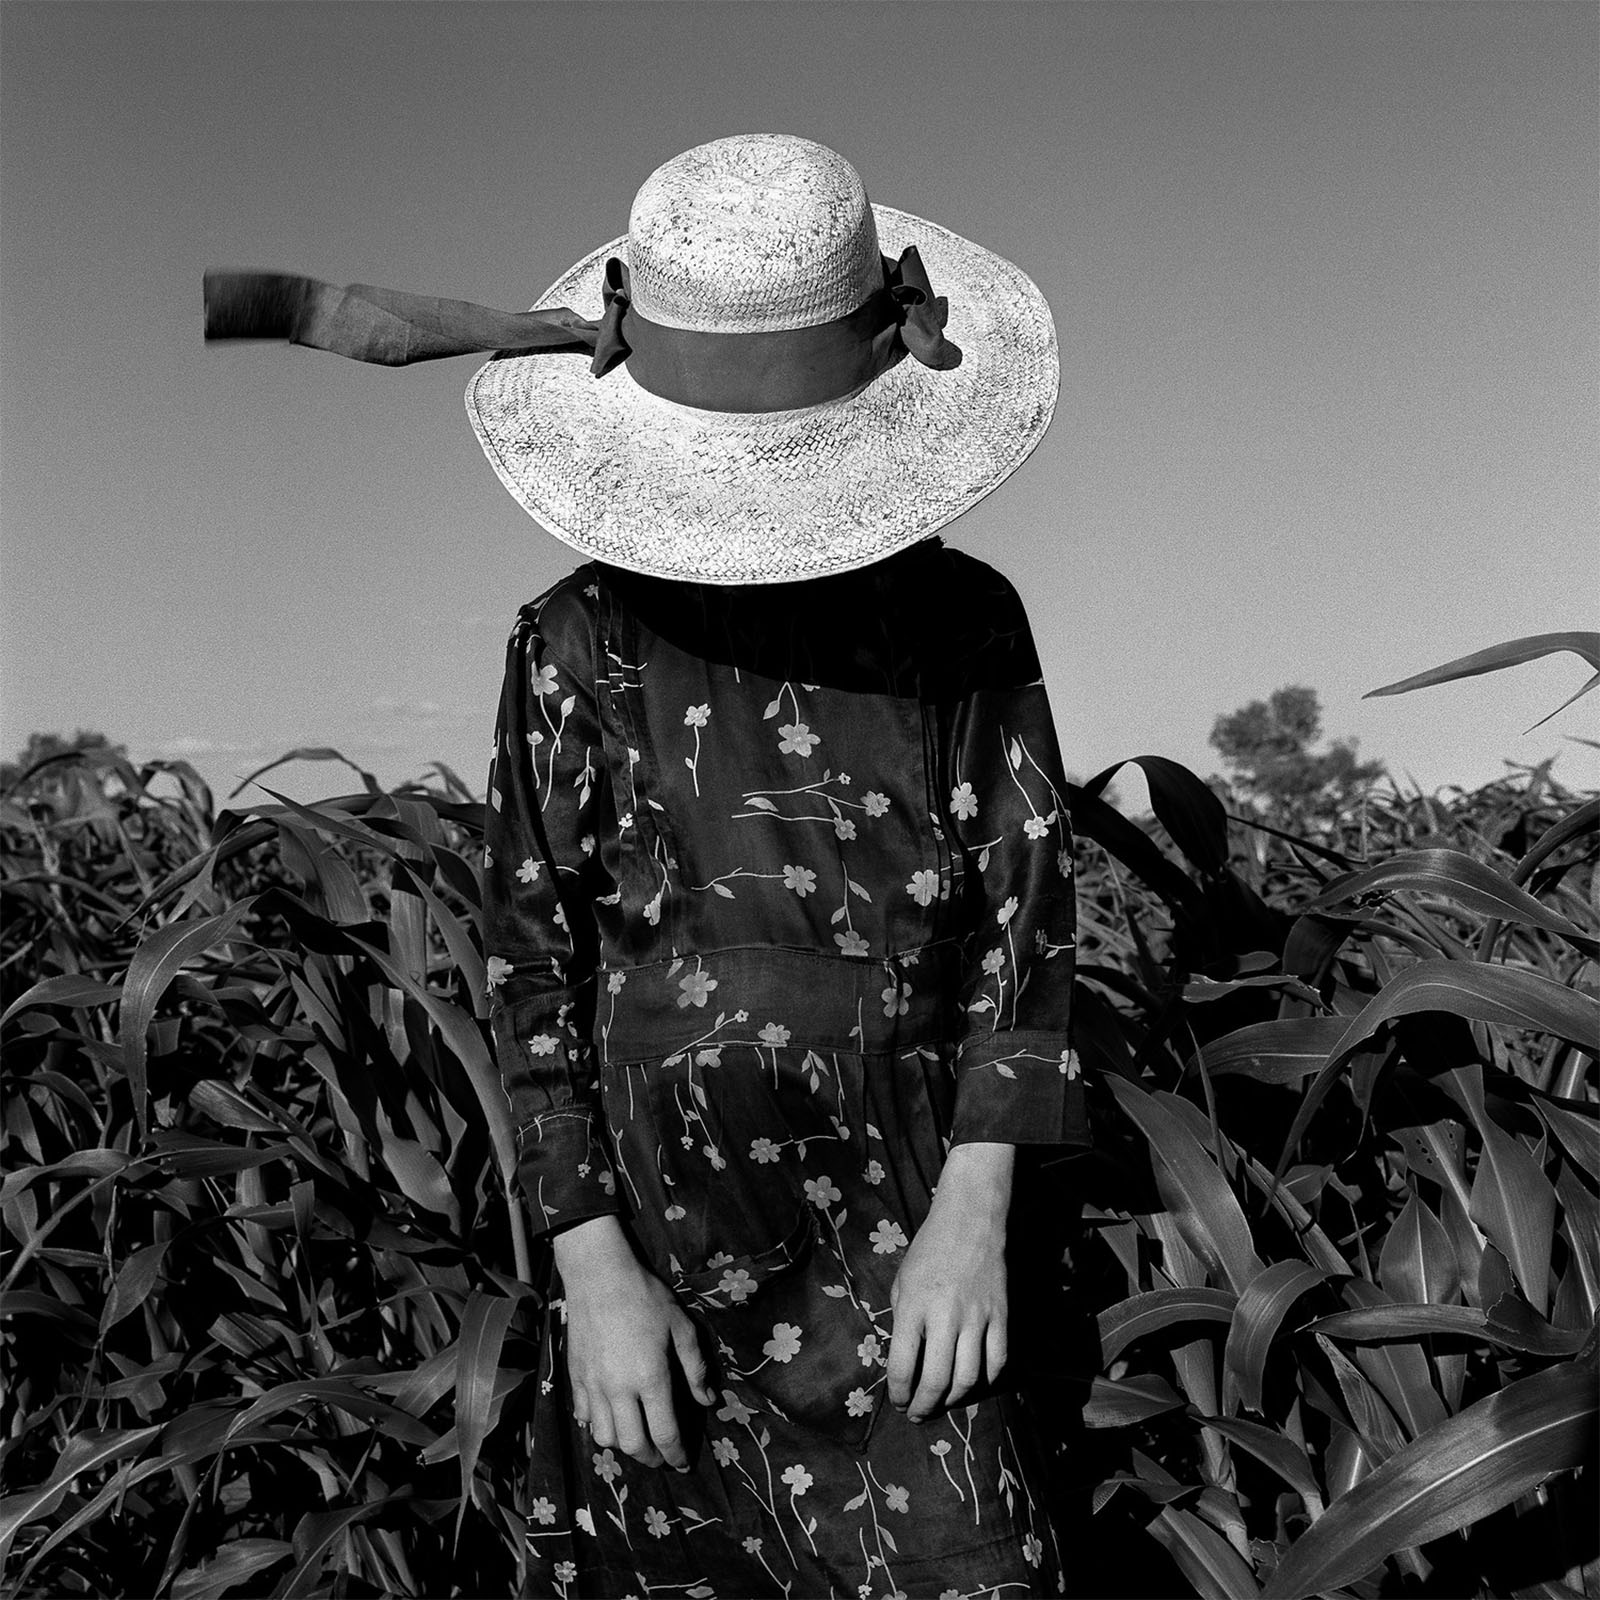 A person stands in a field of tall plants, wearing a patterned, long-sleeve dress and a wide-brimmed hat adorned with a ribbon. The hat obscures the person's face, and the ribbon trails in the wind against a clear sky.